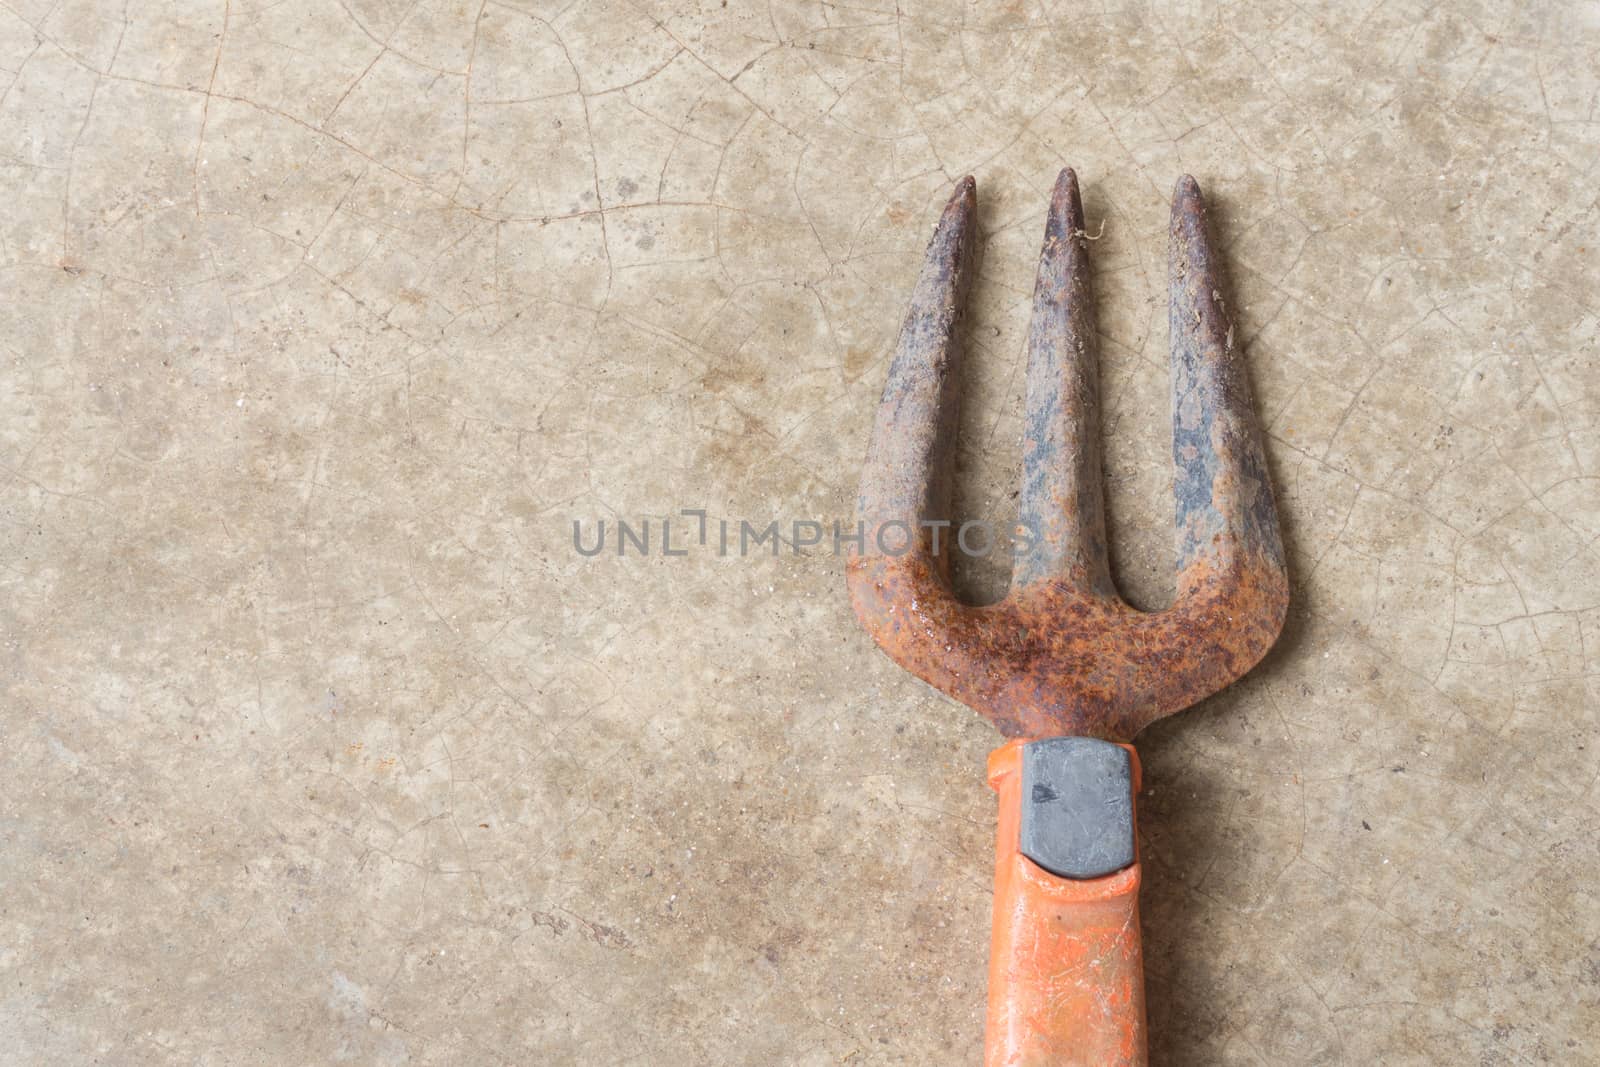 Rusty Old Fork Gardening Tool on Concrete Floor Background